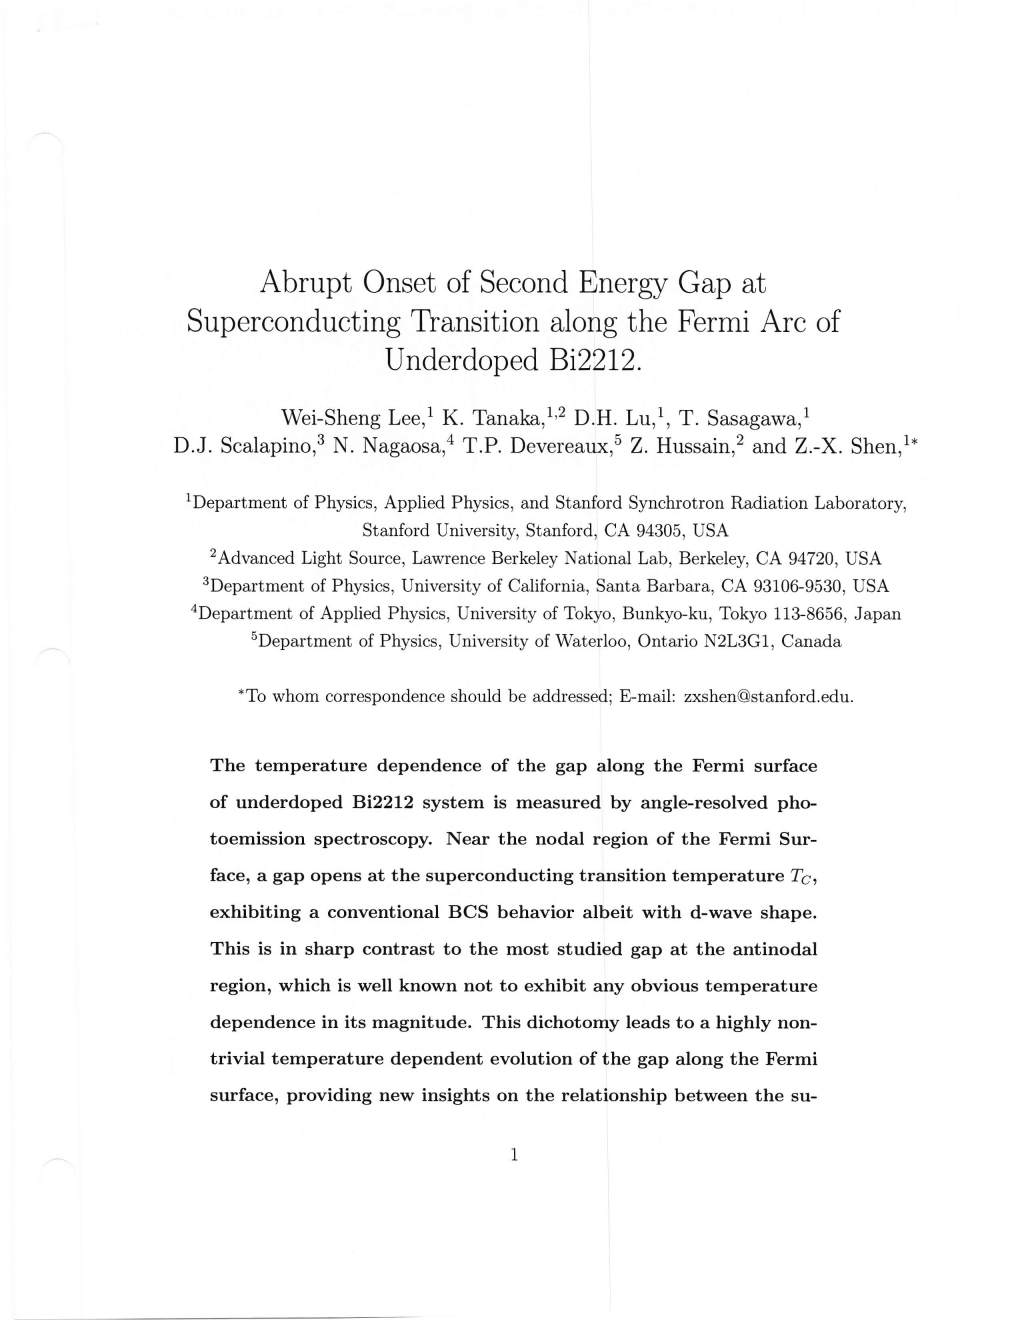 Abrupt Onset of a Second Energy Gap at the Superconducting Transition Of